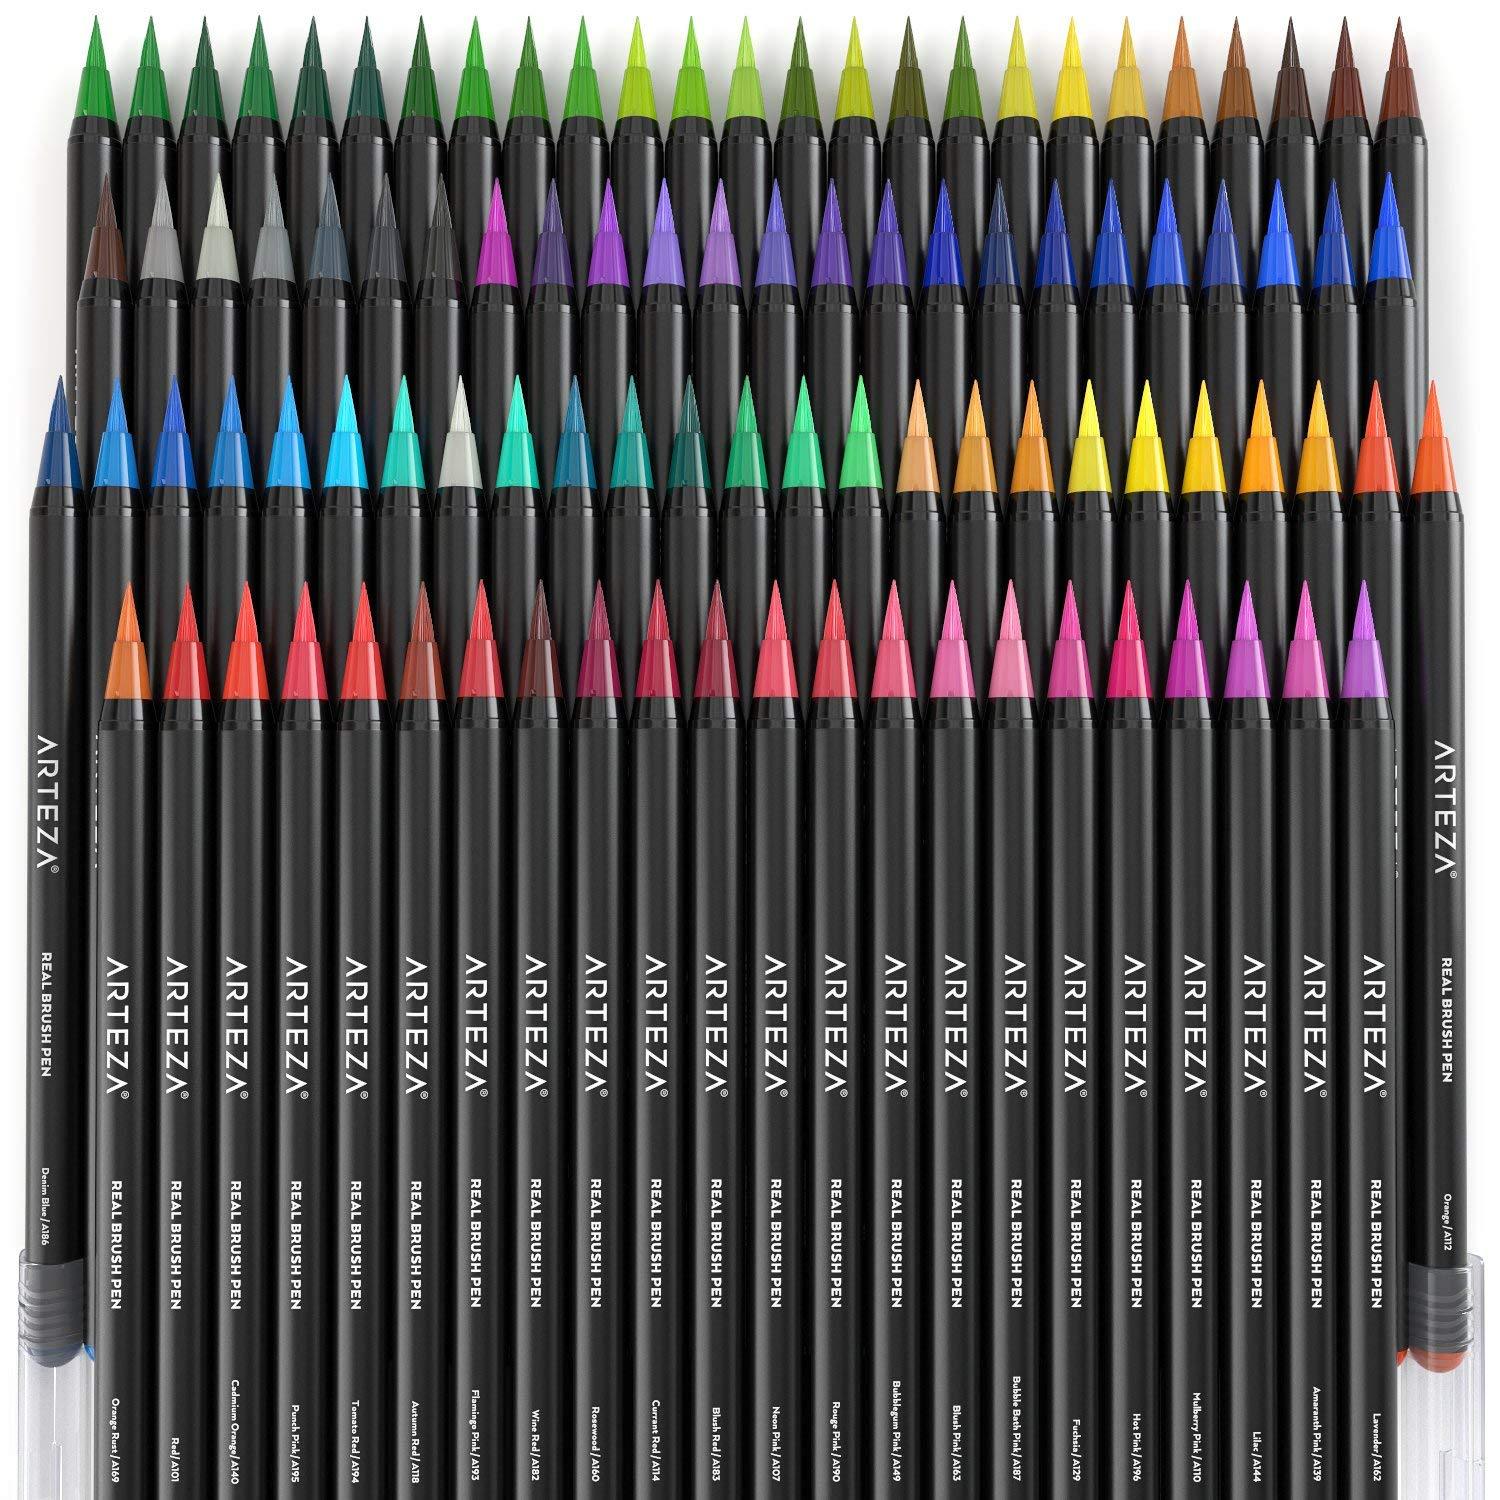 https://arteza.com/cdn/shop/products/real-brush-pens-96-with-organizer-case-with-108-slots-water-brush-pen_r260zPCM.jpg?v=1668631576&width=1946